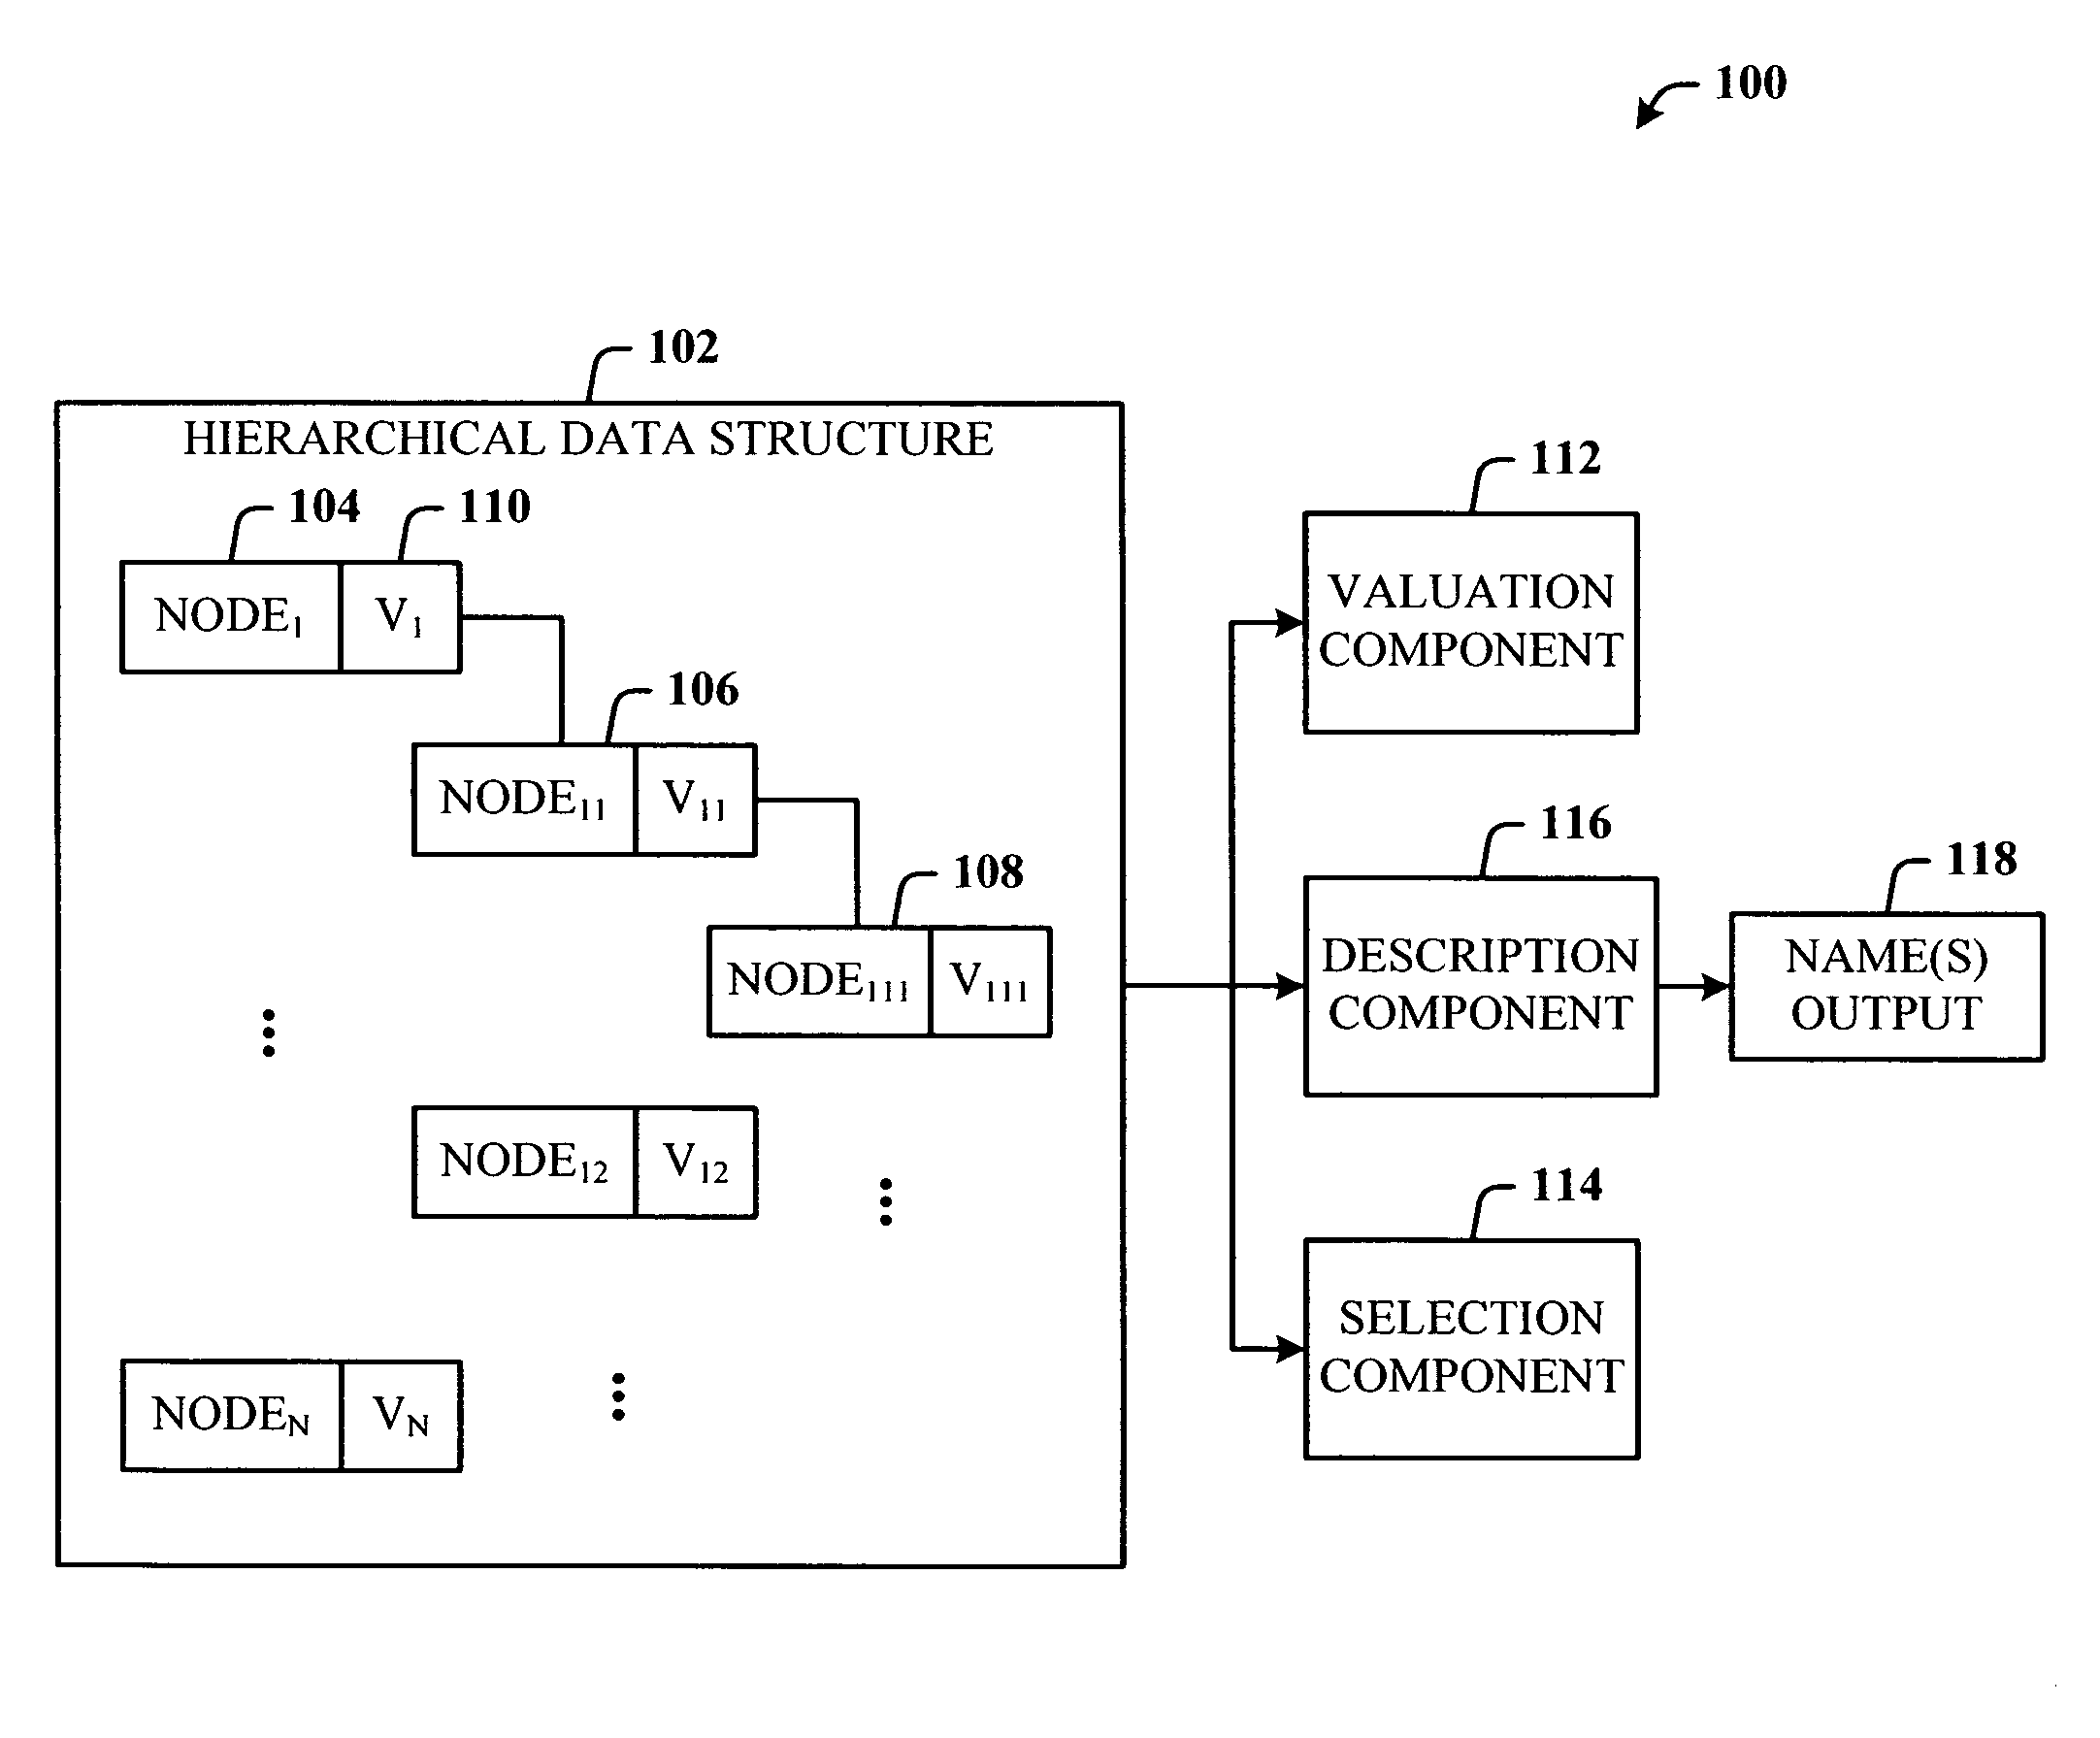 Generation of meaningful names in flattened hierarchical structures